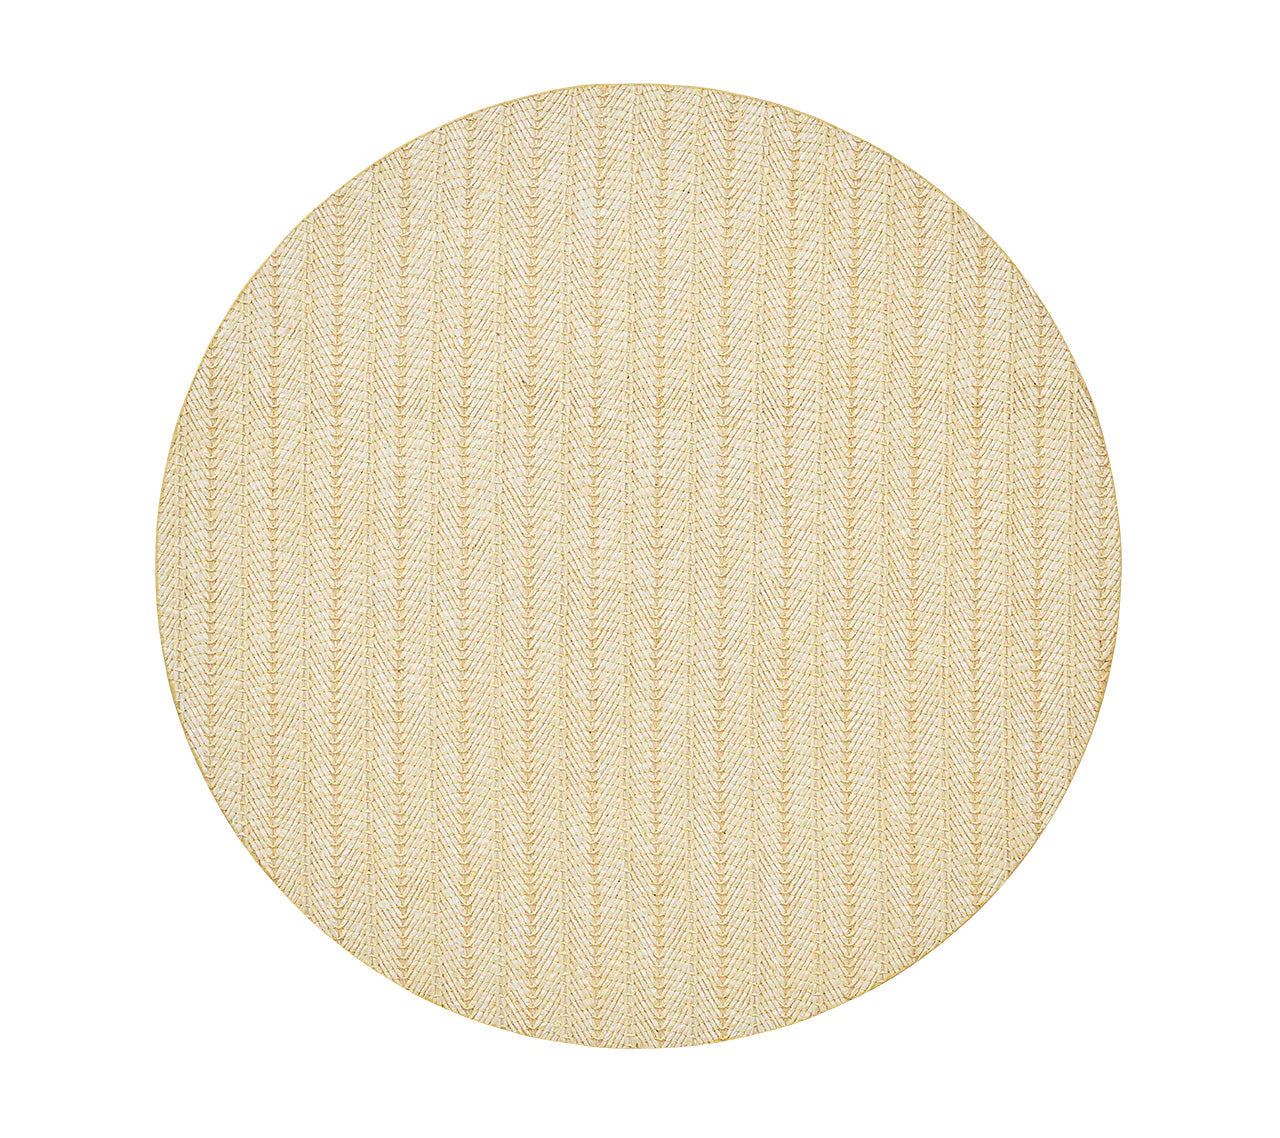 Herringbone Placemat in Butter, Set of 4